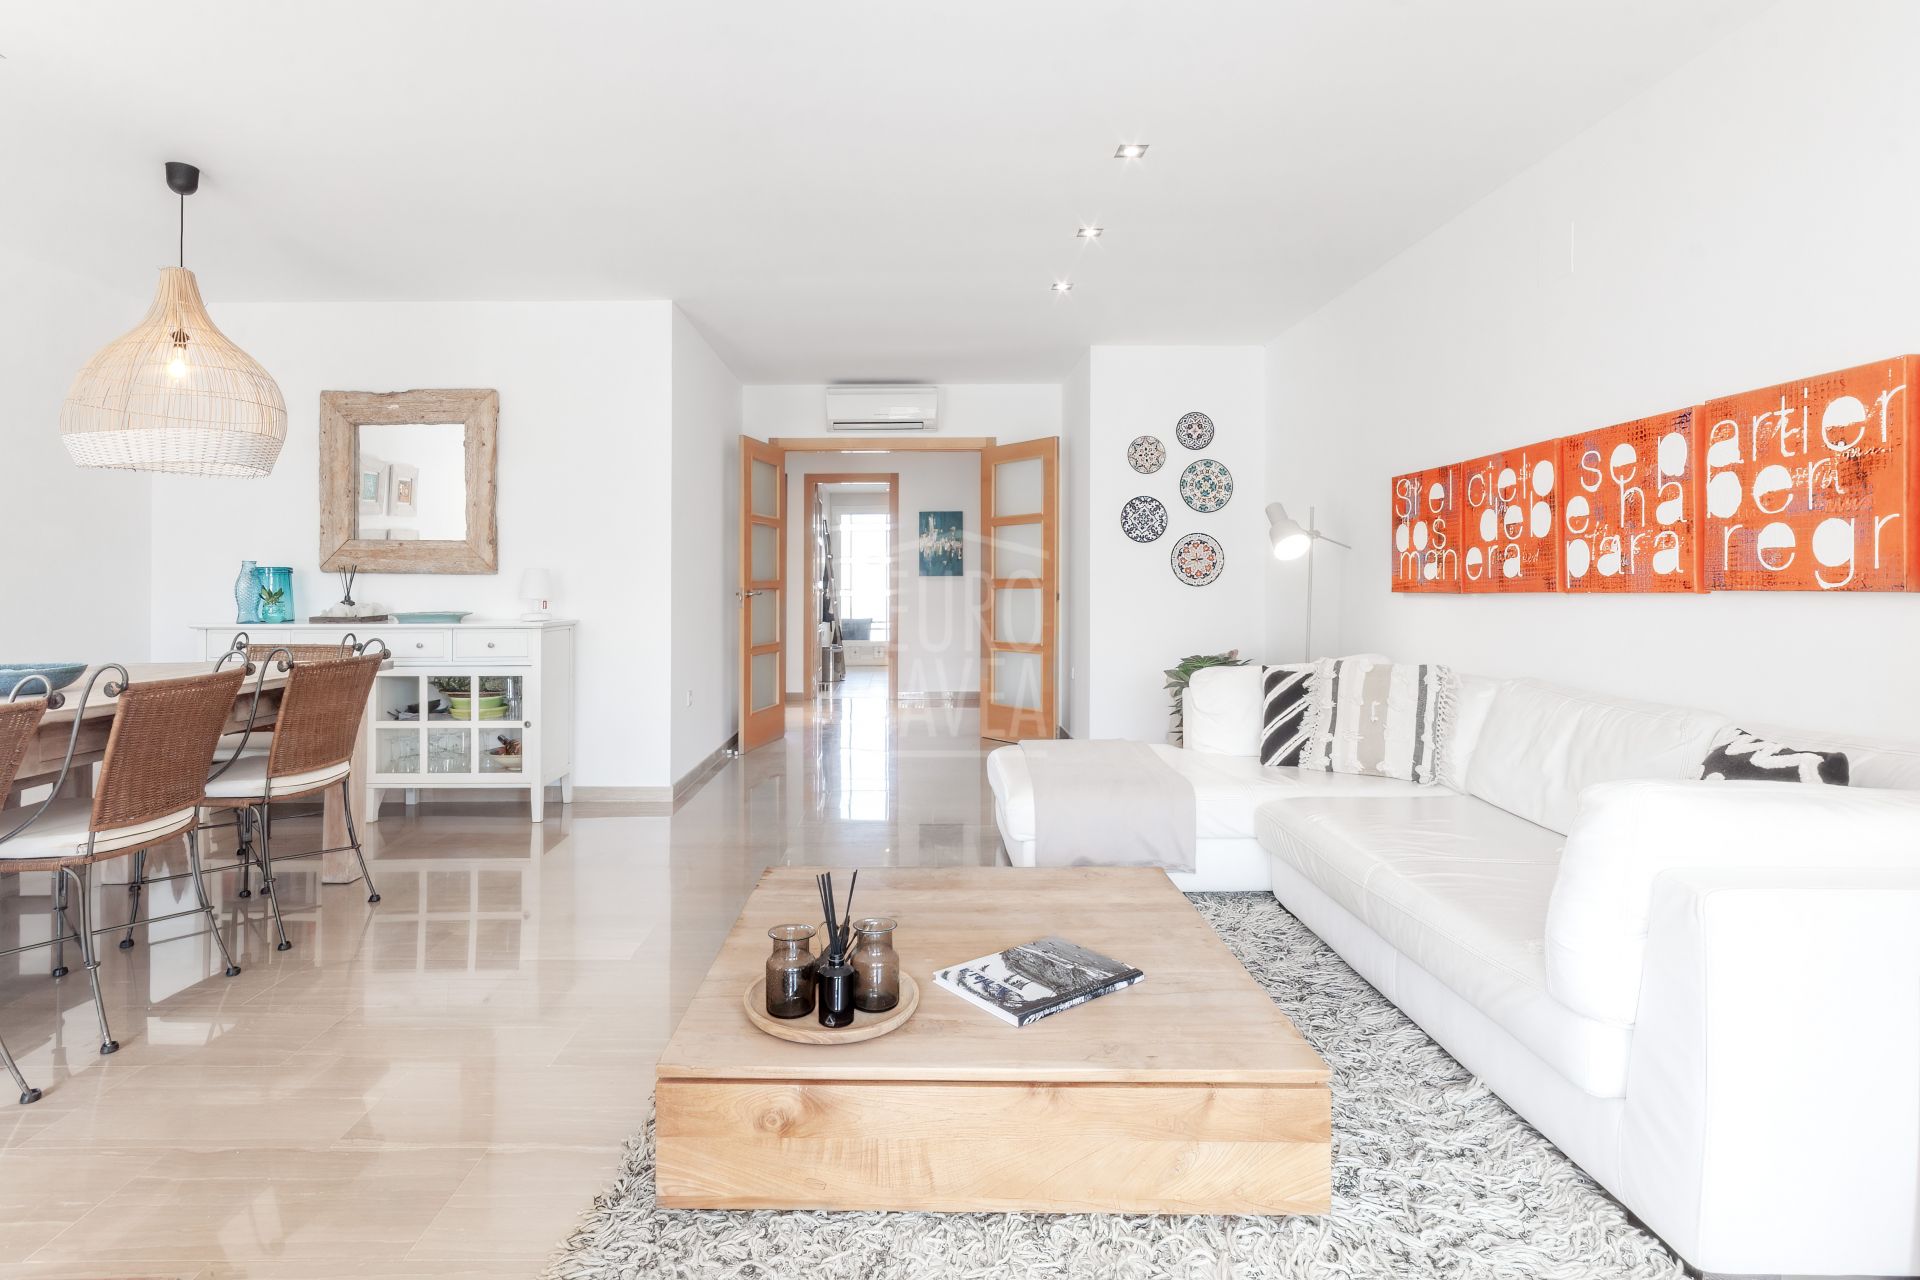 Duplex for sale exclusively in Jávea, a step away from Arenal beach